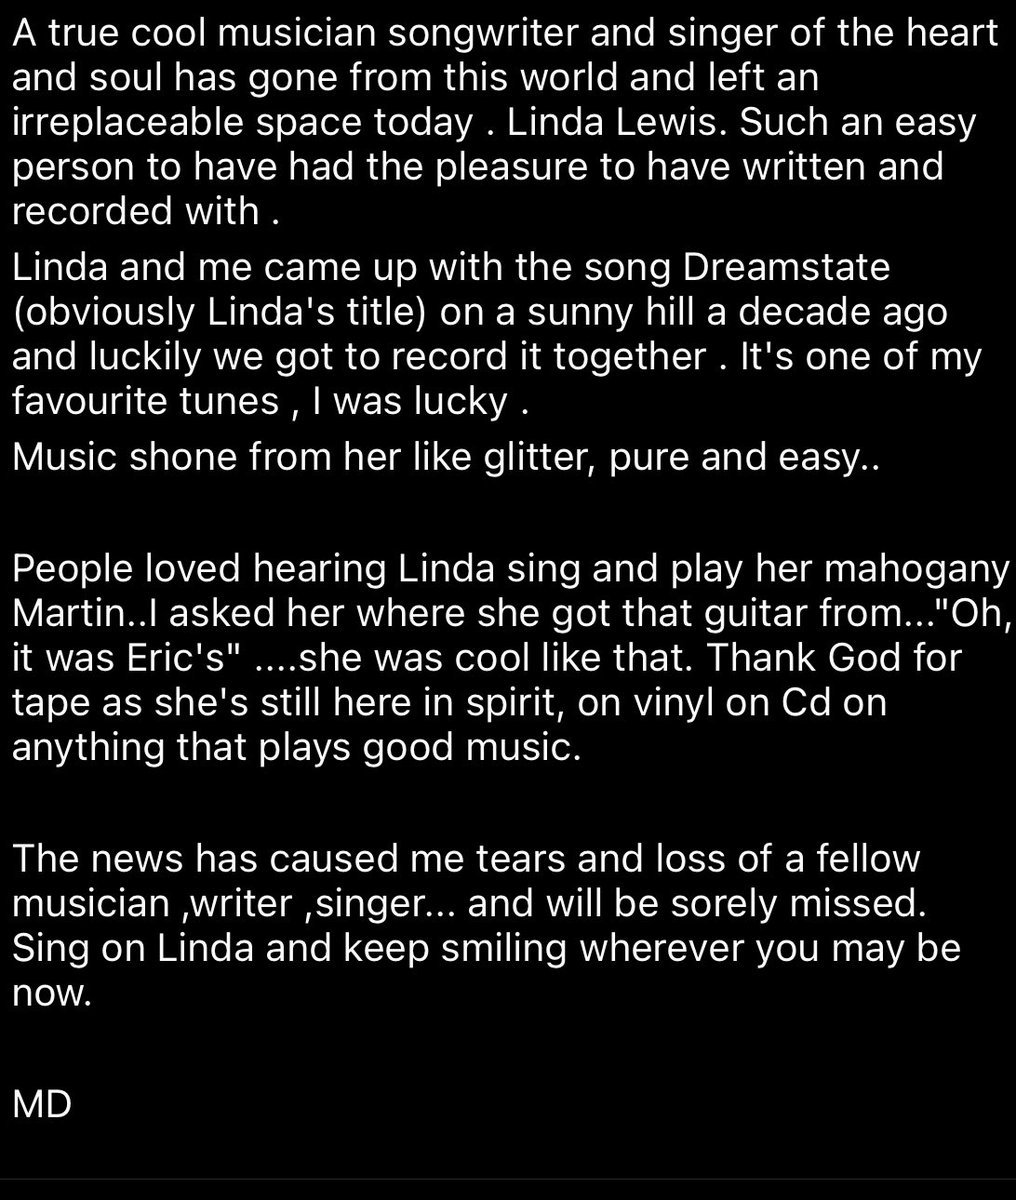 Put on Lark and hear the great Linda Lewis. Such sad news. Note from Matt below… all the love to Linda’s family.